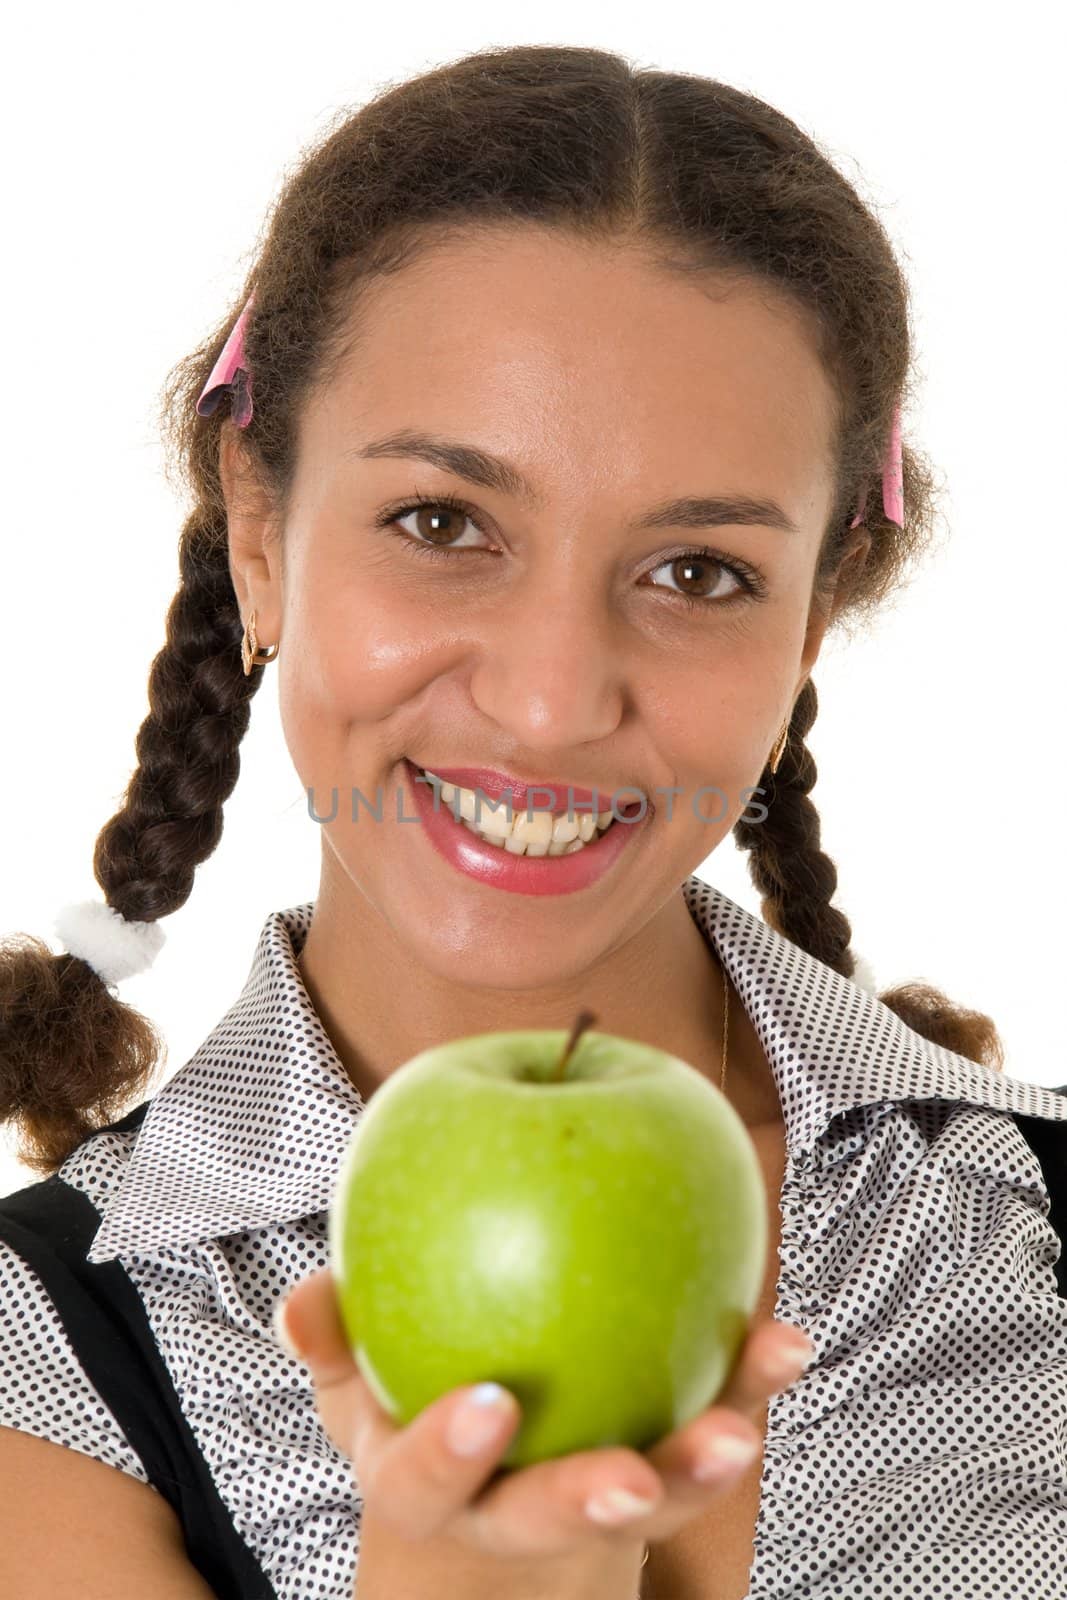 smiling girl with green apple on a white background